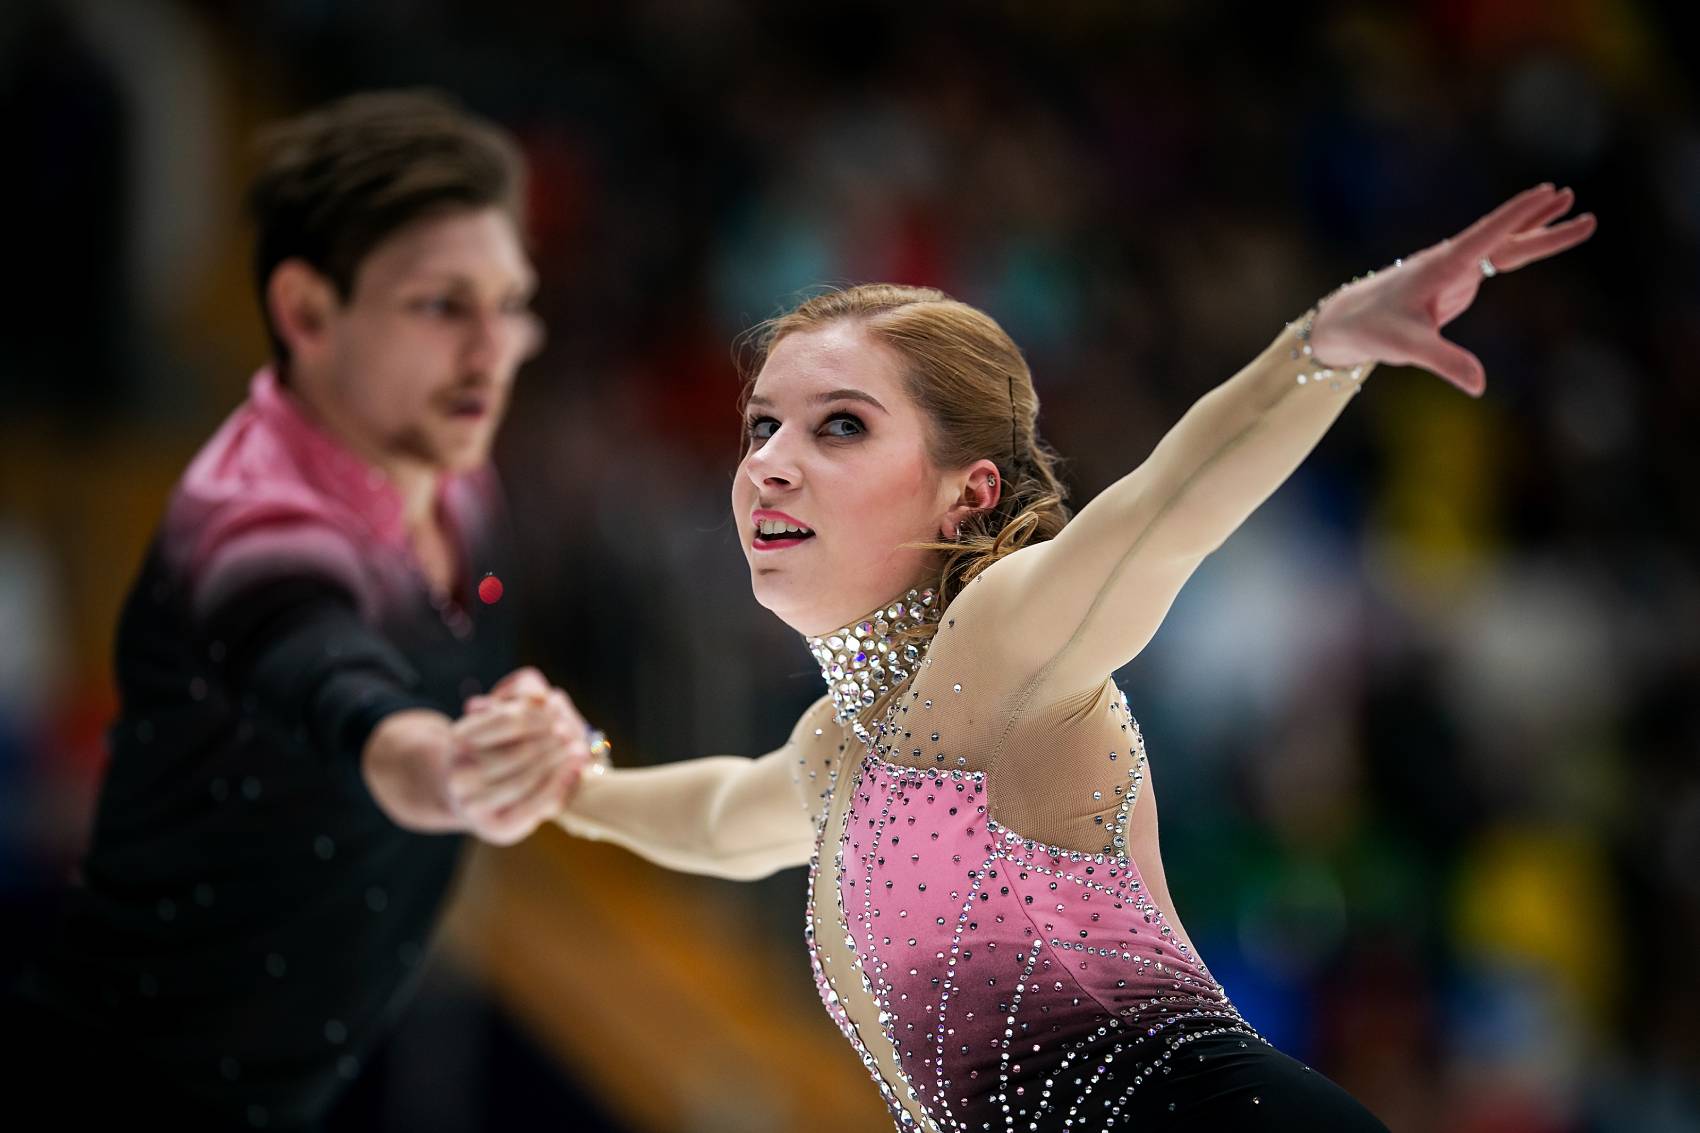 Ekaterina Alexandrovskaya, a two-time Australian national champion skater, tragically died at the age of 20.